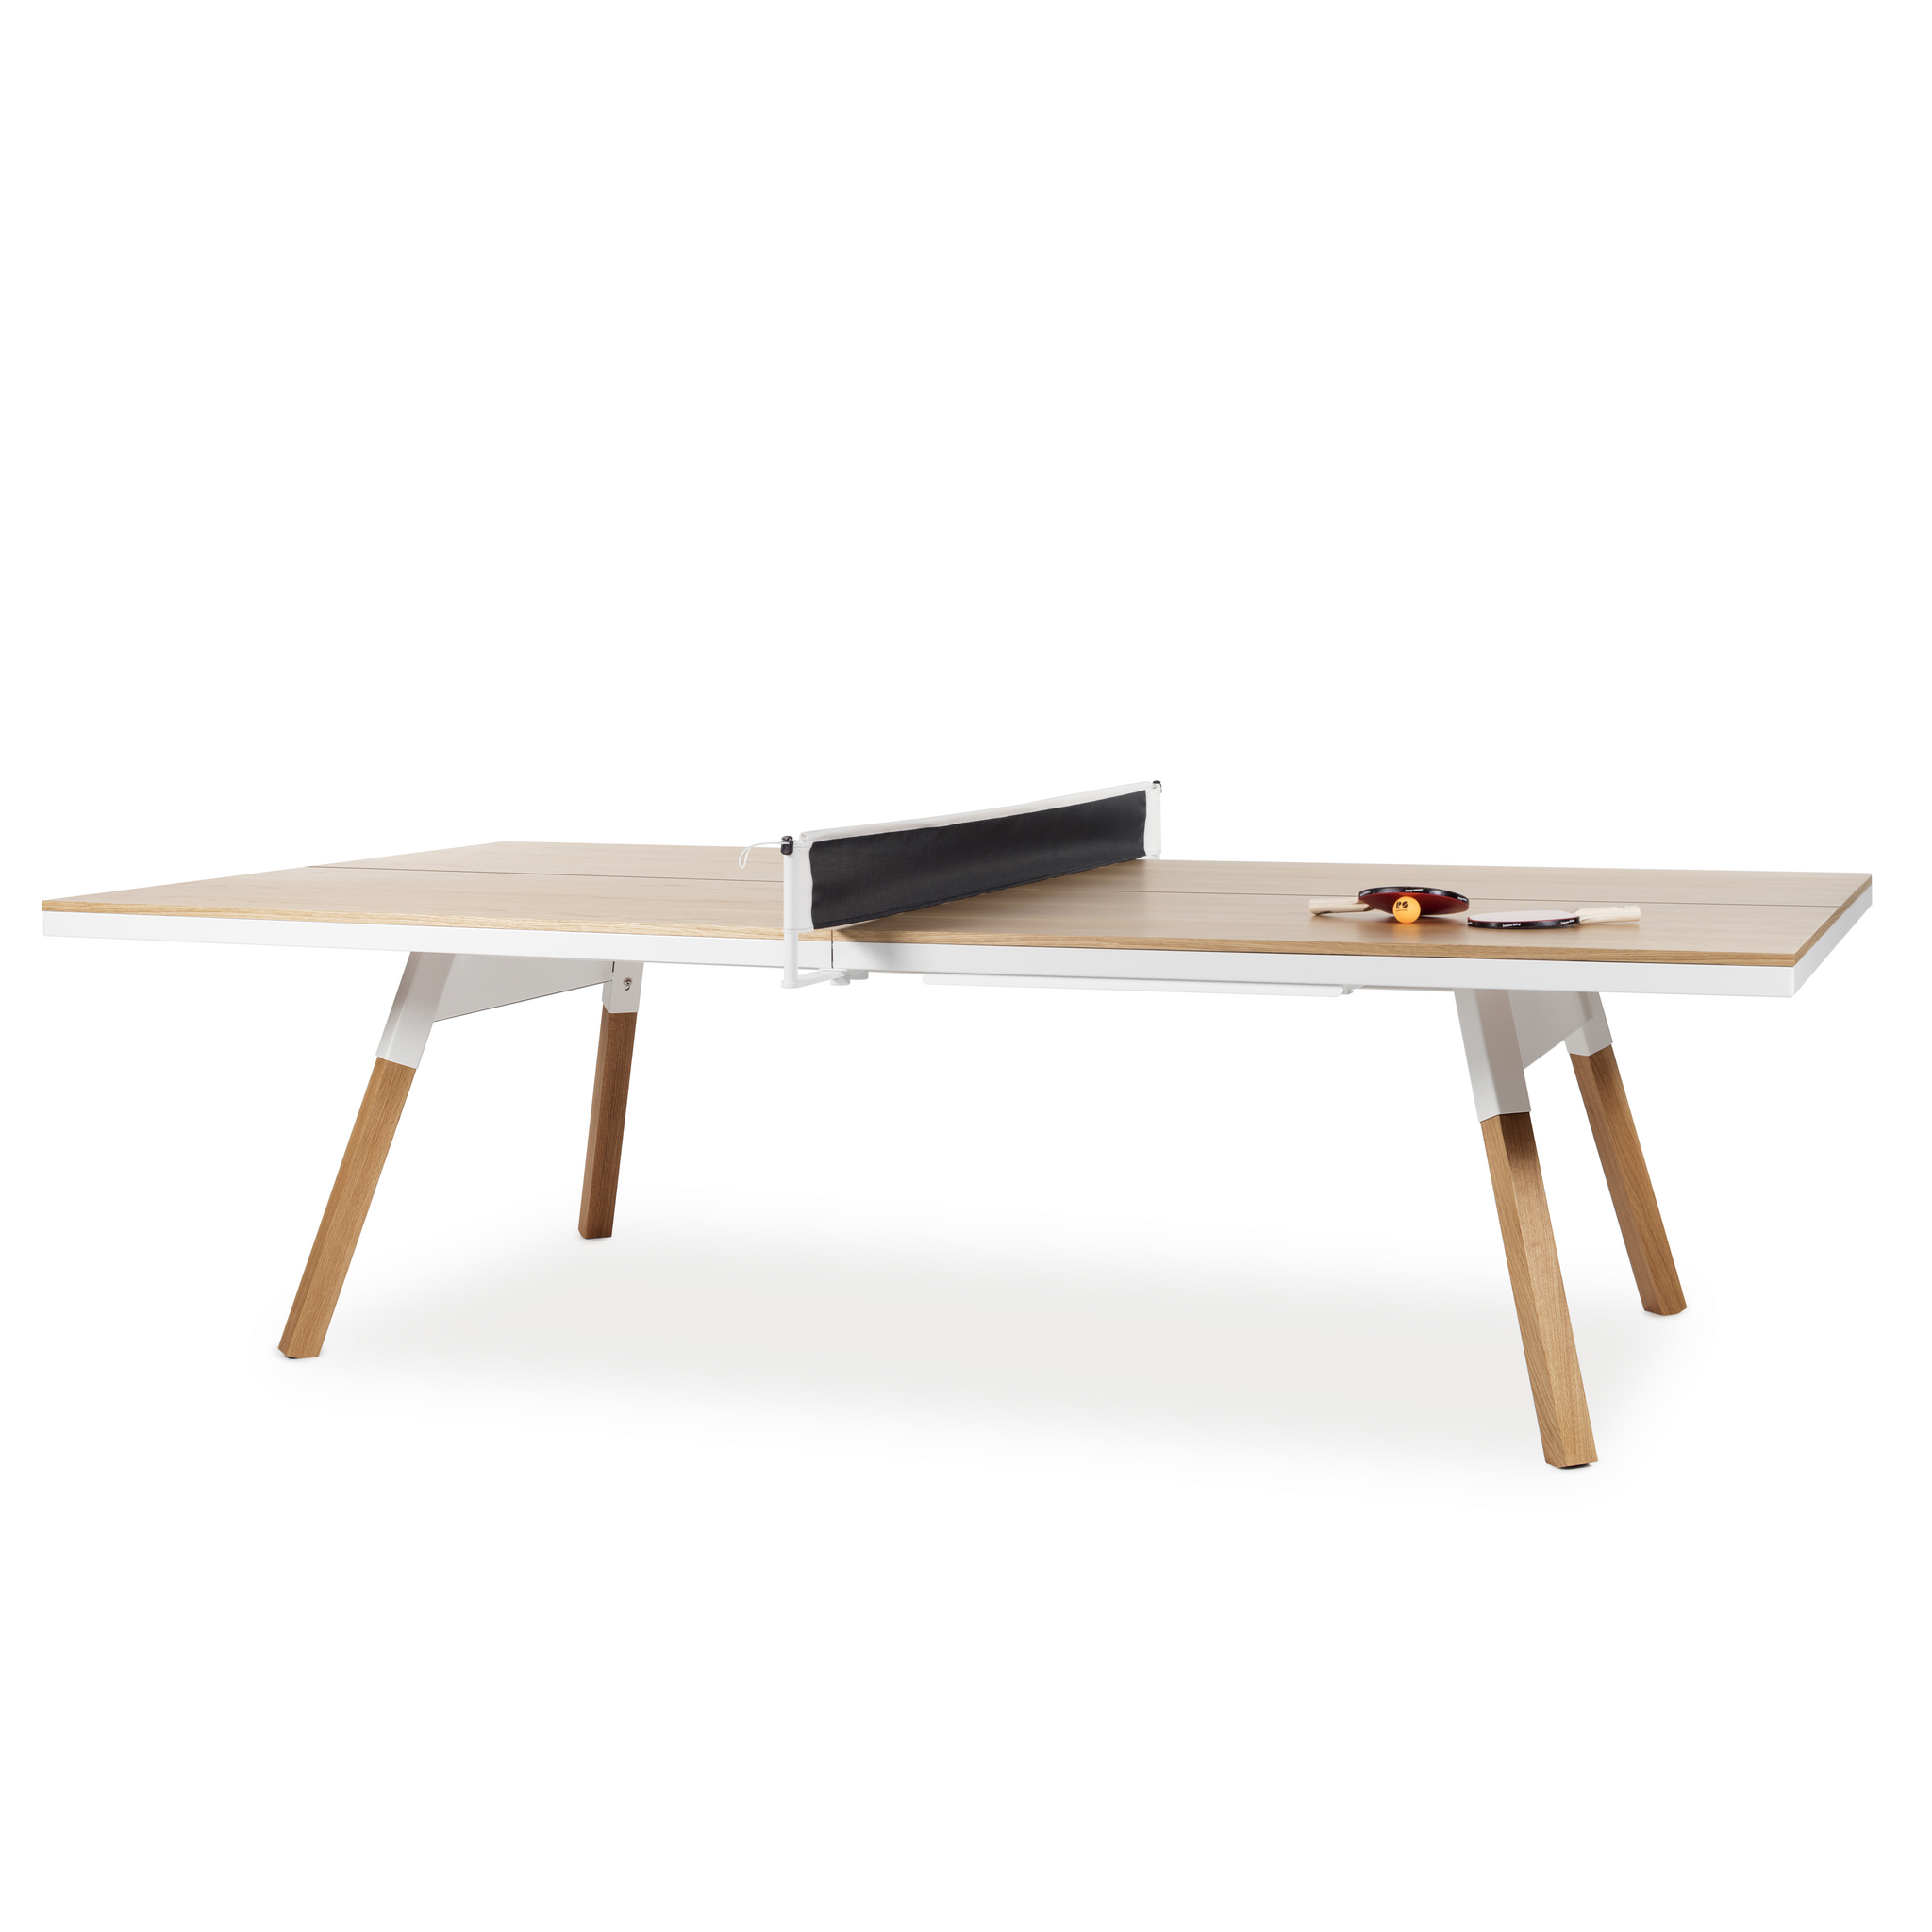 You and Me Tournament Size Table Tennis in Oak & White